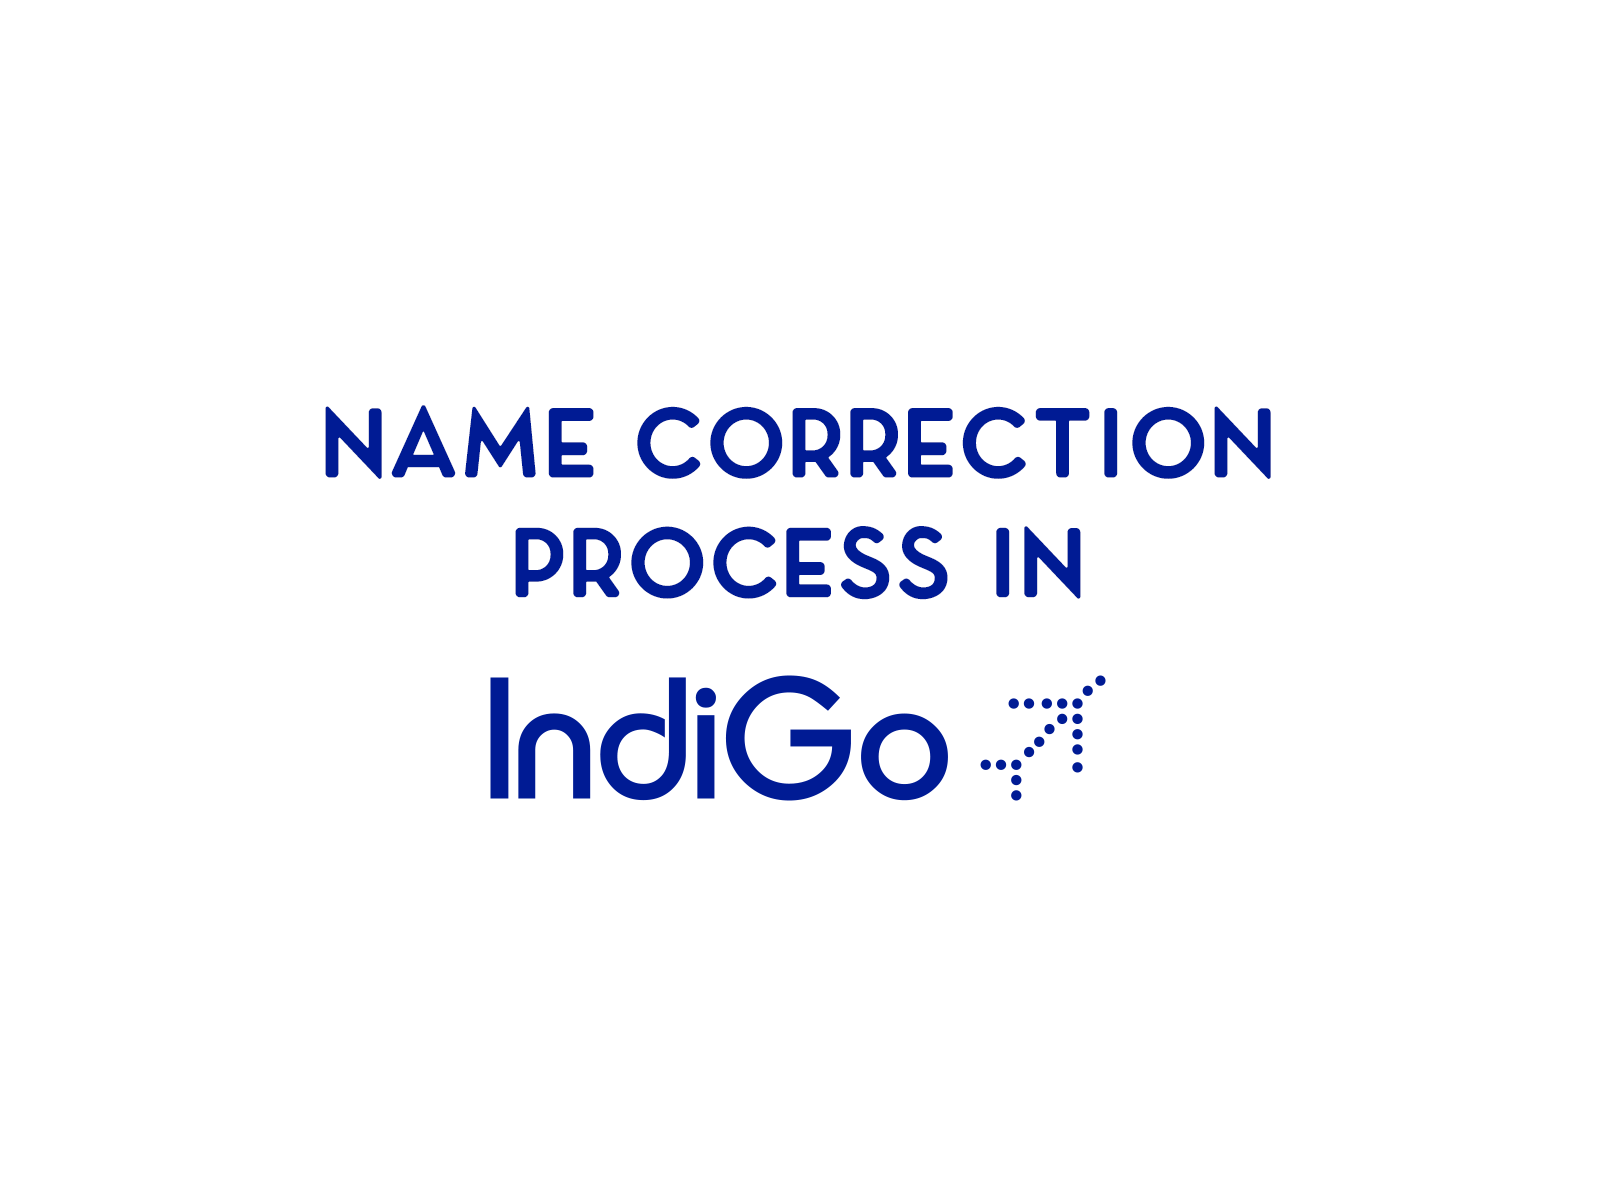 Name correction process in IndiGo airlines 1